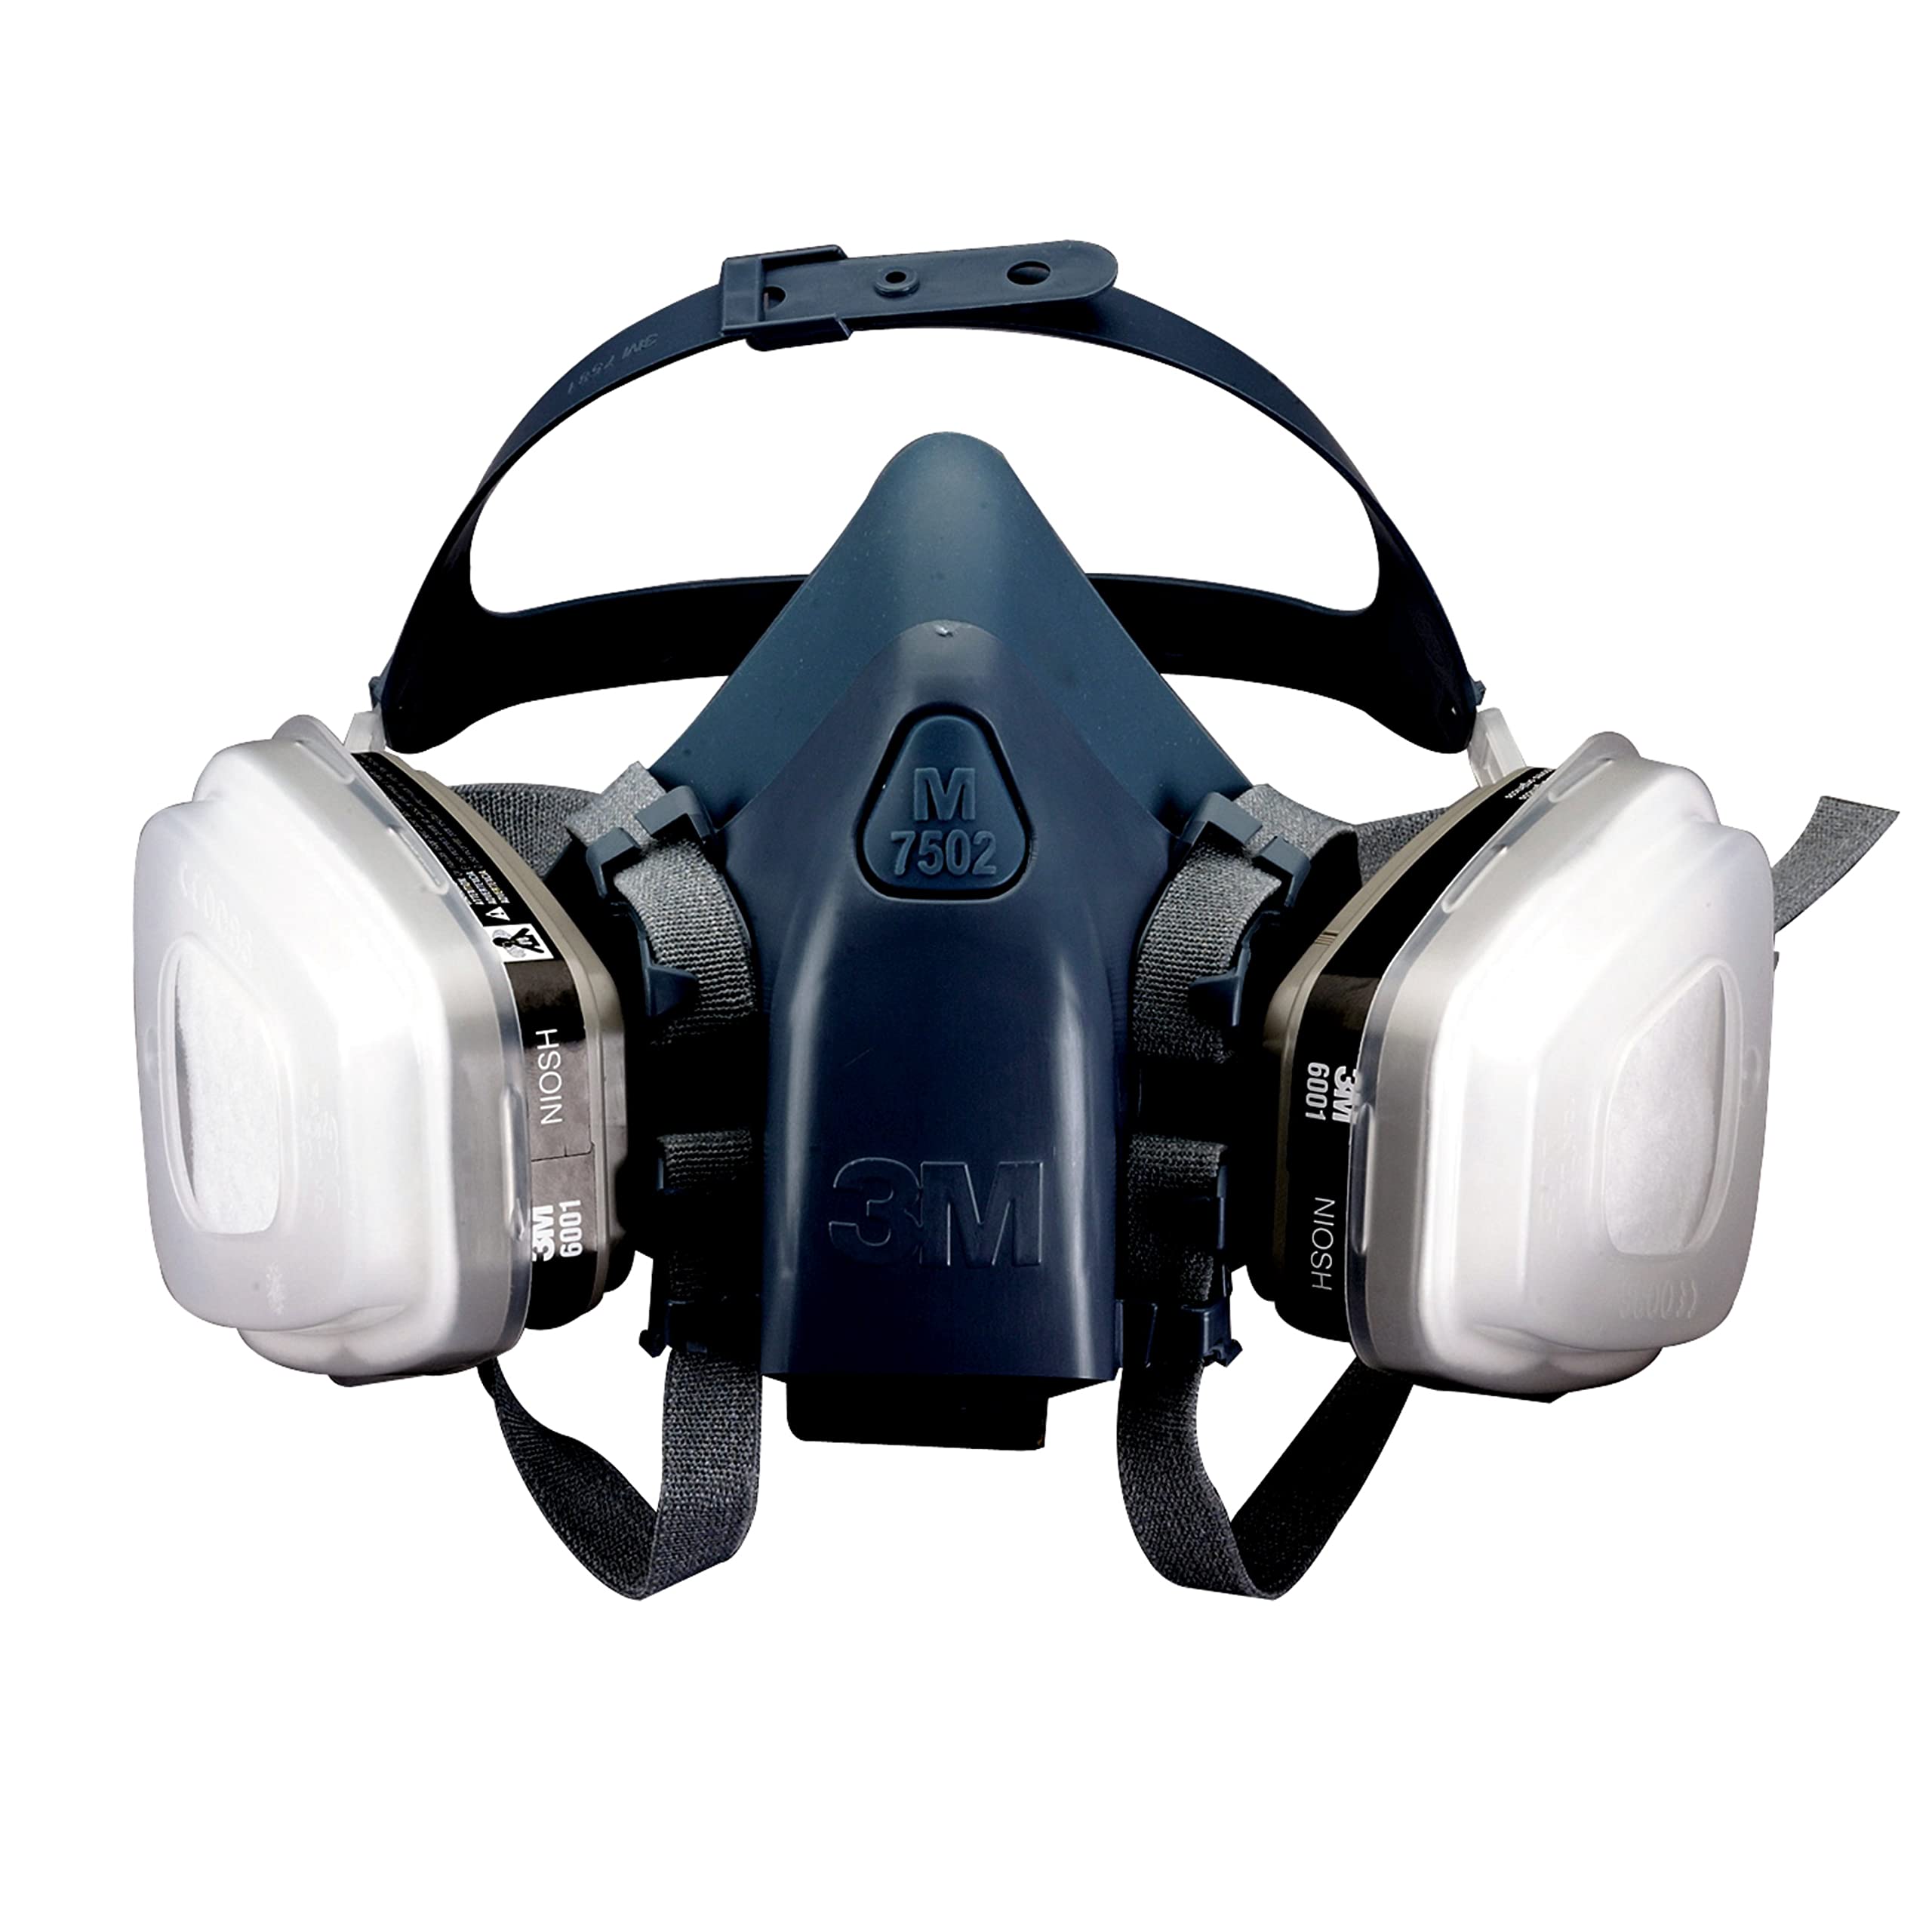 3M Professional Paint Respirator, Recommended For Spray Painting And Jobs With Solvents, Long Lasting Comfort, Medium, N95, 7512PA1-A